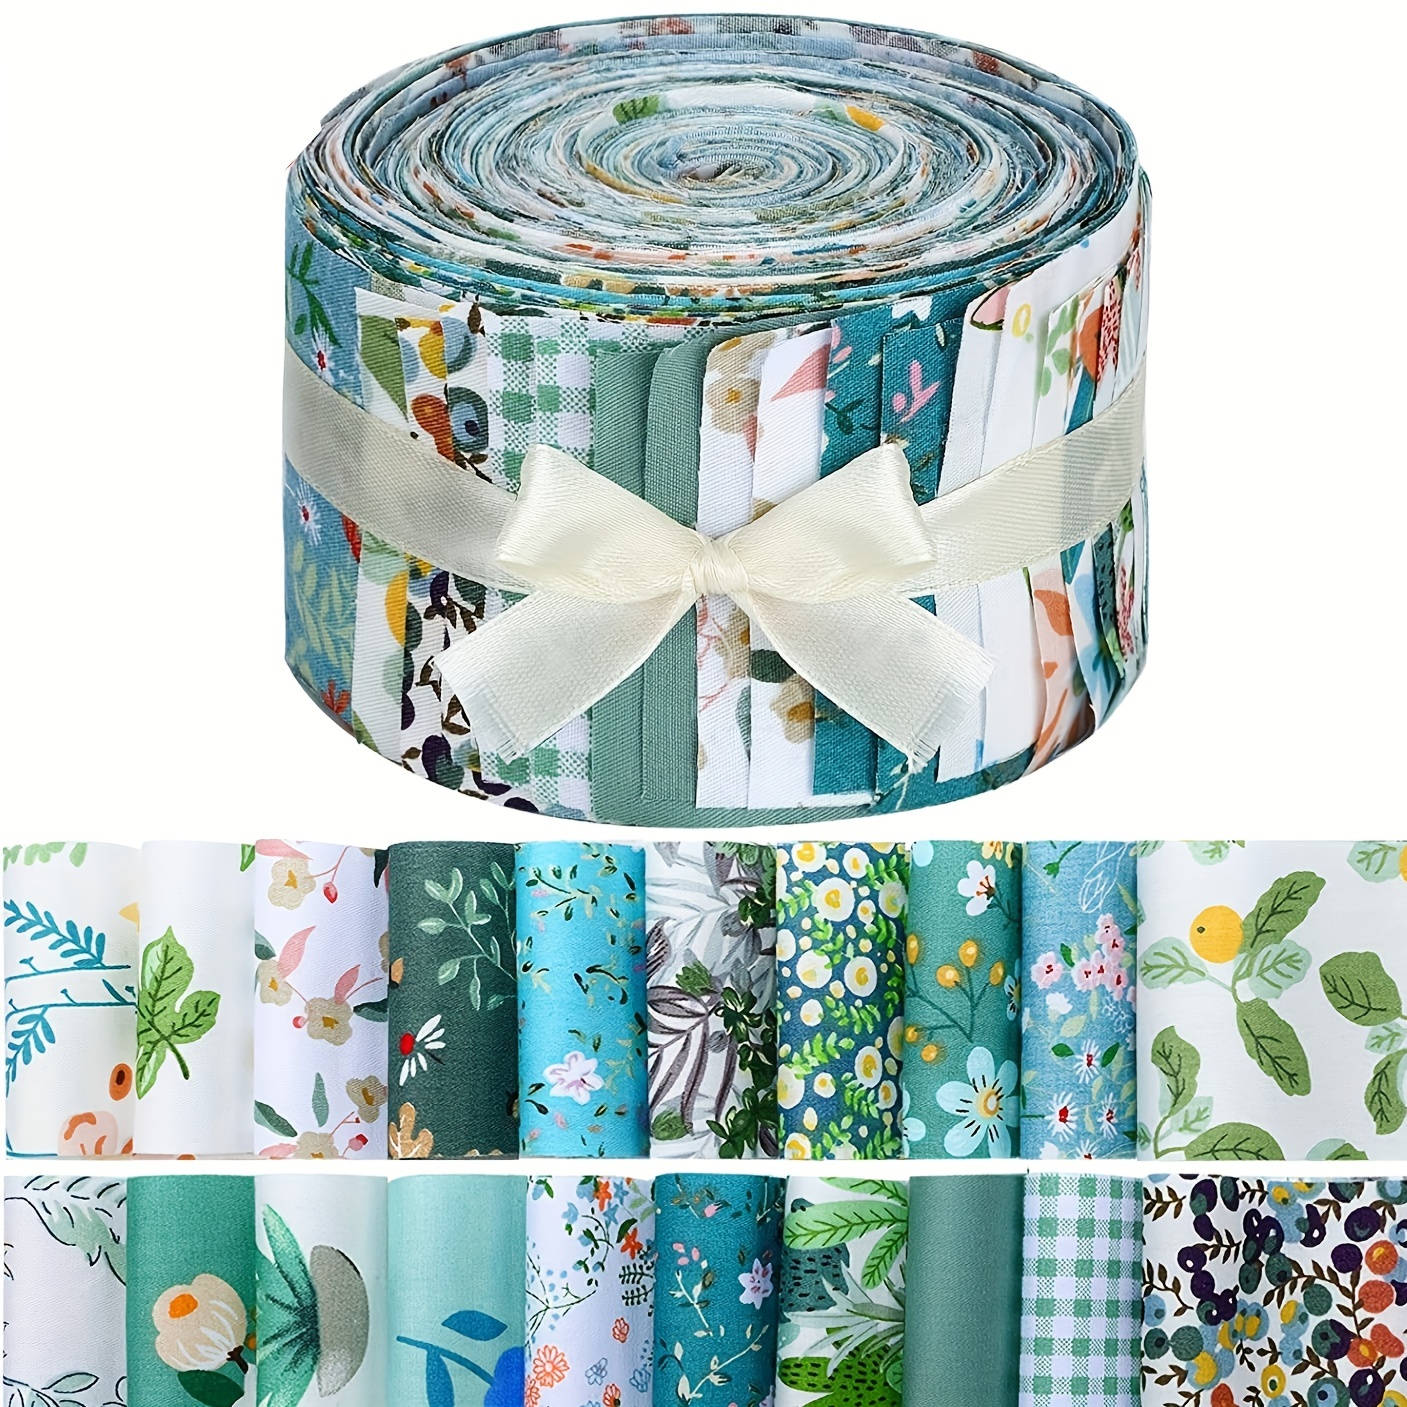 Jelly Rolls for Quilting, Jelly Roll Fabric Strips for Quilting, Pre-Cut  Jelly Roll Fabric in Vivid Colors, Jelly Rolls for Quilting Clearance,  Fabric